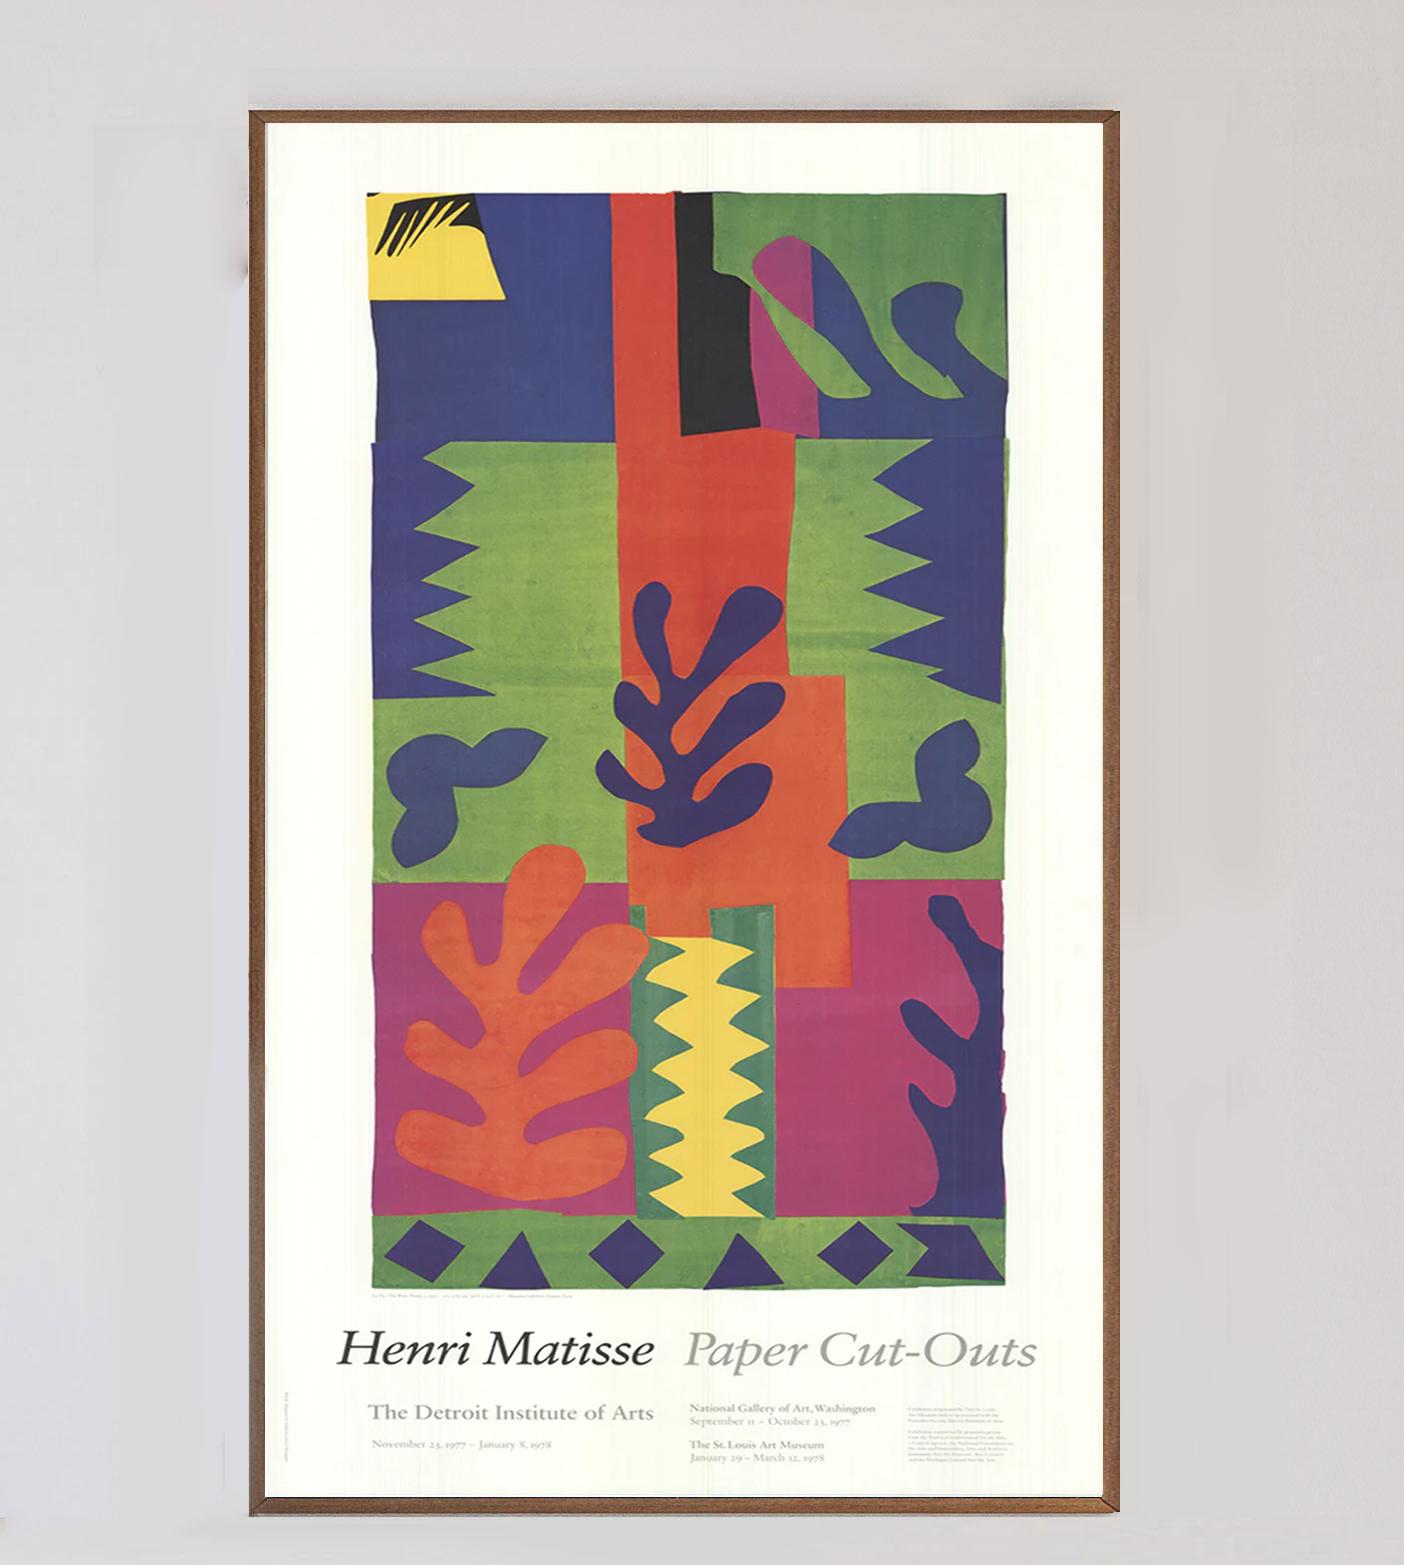 Gorgeous poster depicting a 1950 artwork from the groundbreaking paper cut-out series, this poster was created to promote an exhibition of the great Henri Matisse at the Detroit Institute of Arts. Running from November 1977 to January 1978 the